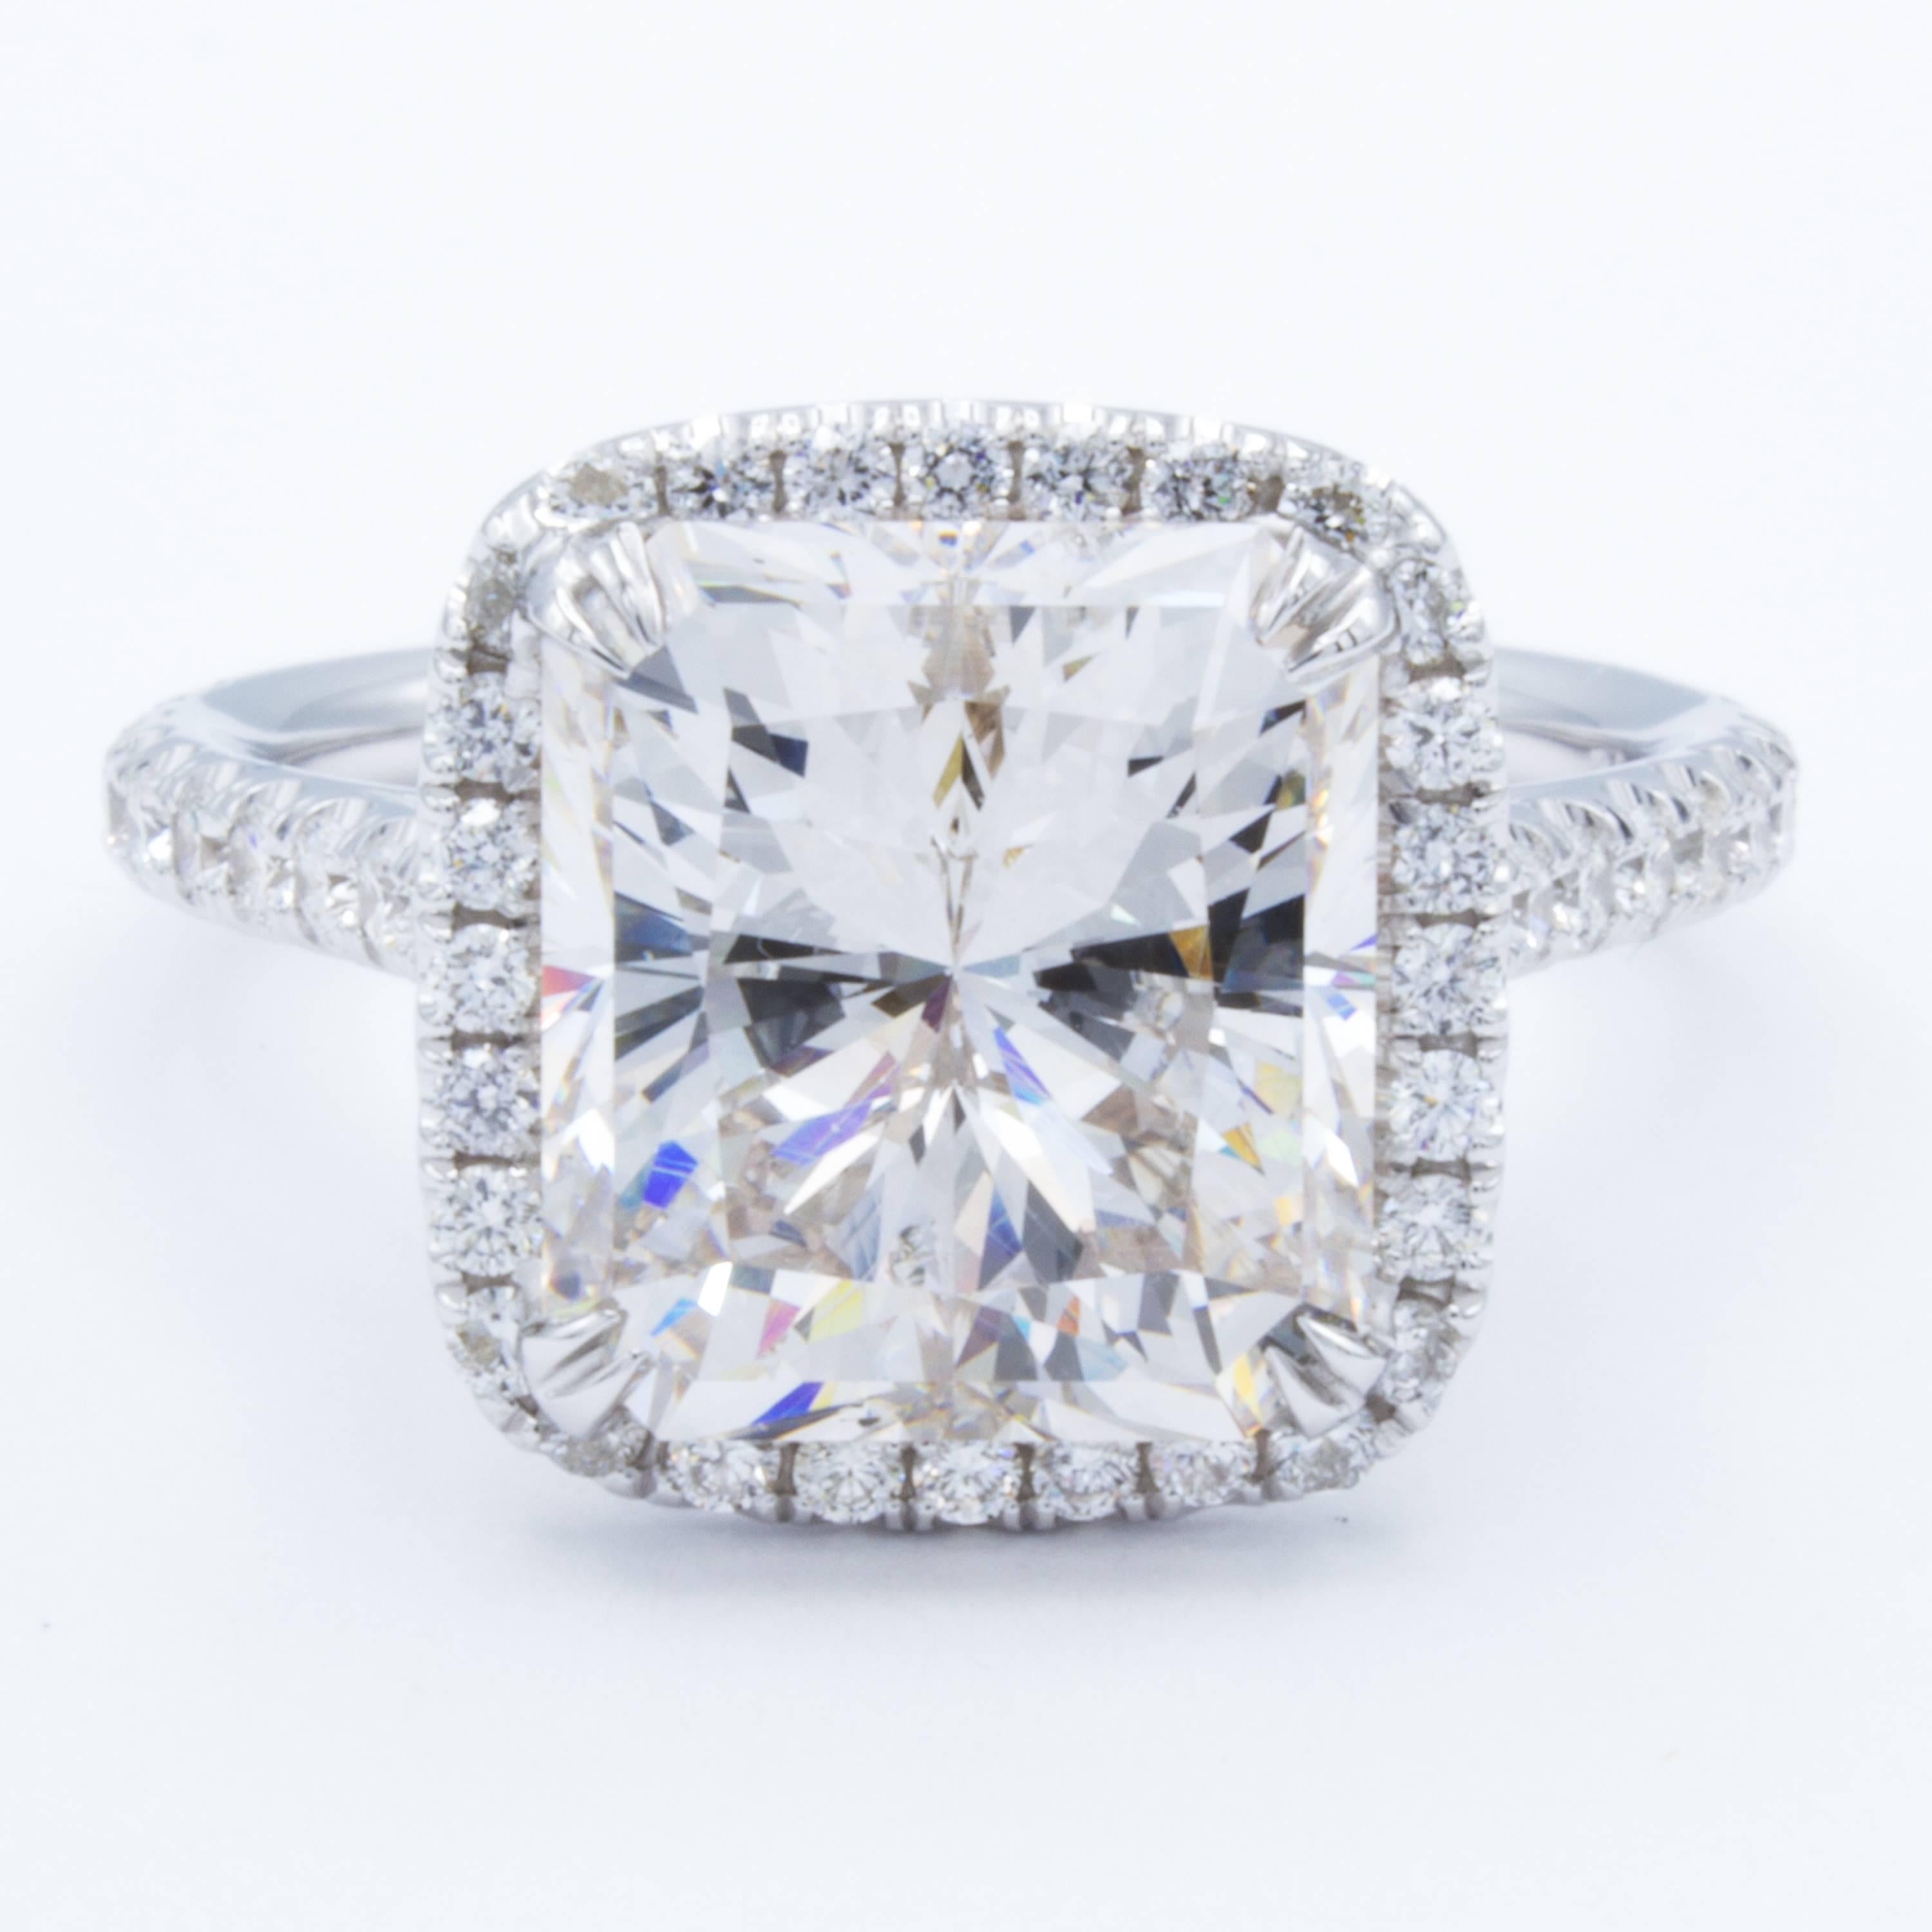 An exceptional Rosenberg Diamonds & Co. diamond engagement ring flaunts a GIA certified 5.17 carat radiant cut diamond of rare beauty. All around the center stone shine round brilliant diamond pave accents that continue into the 18Kt white gold